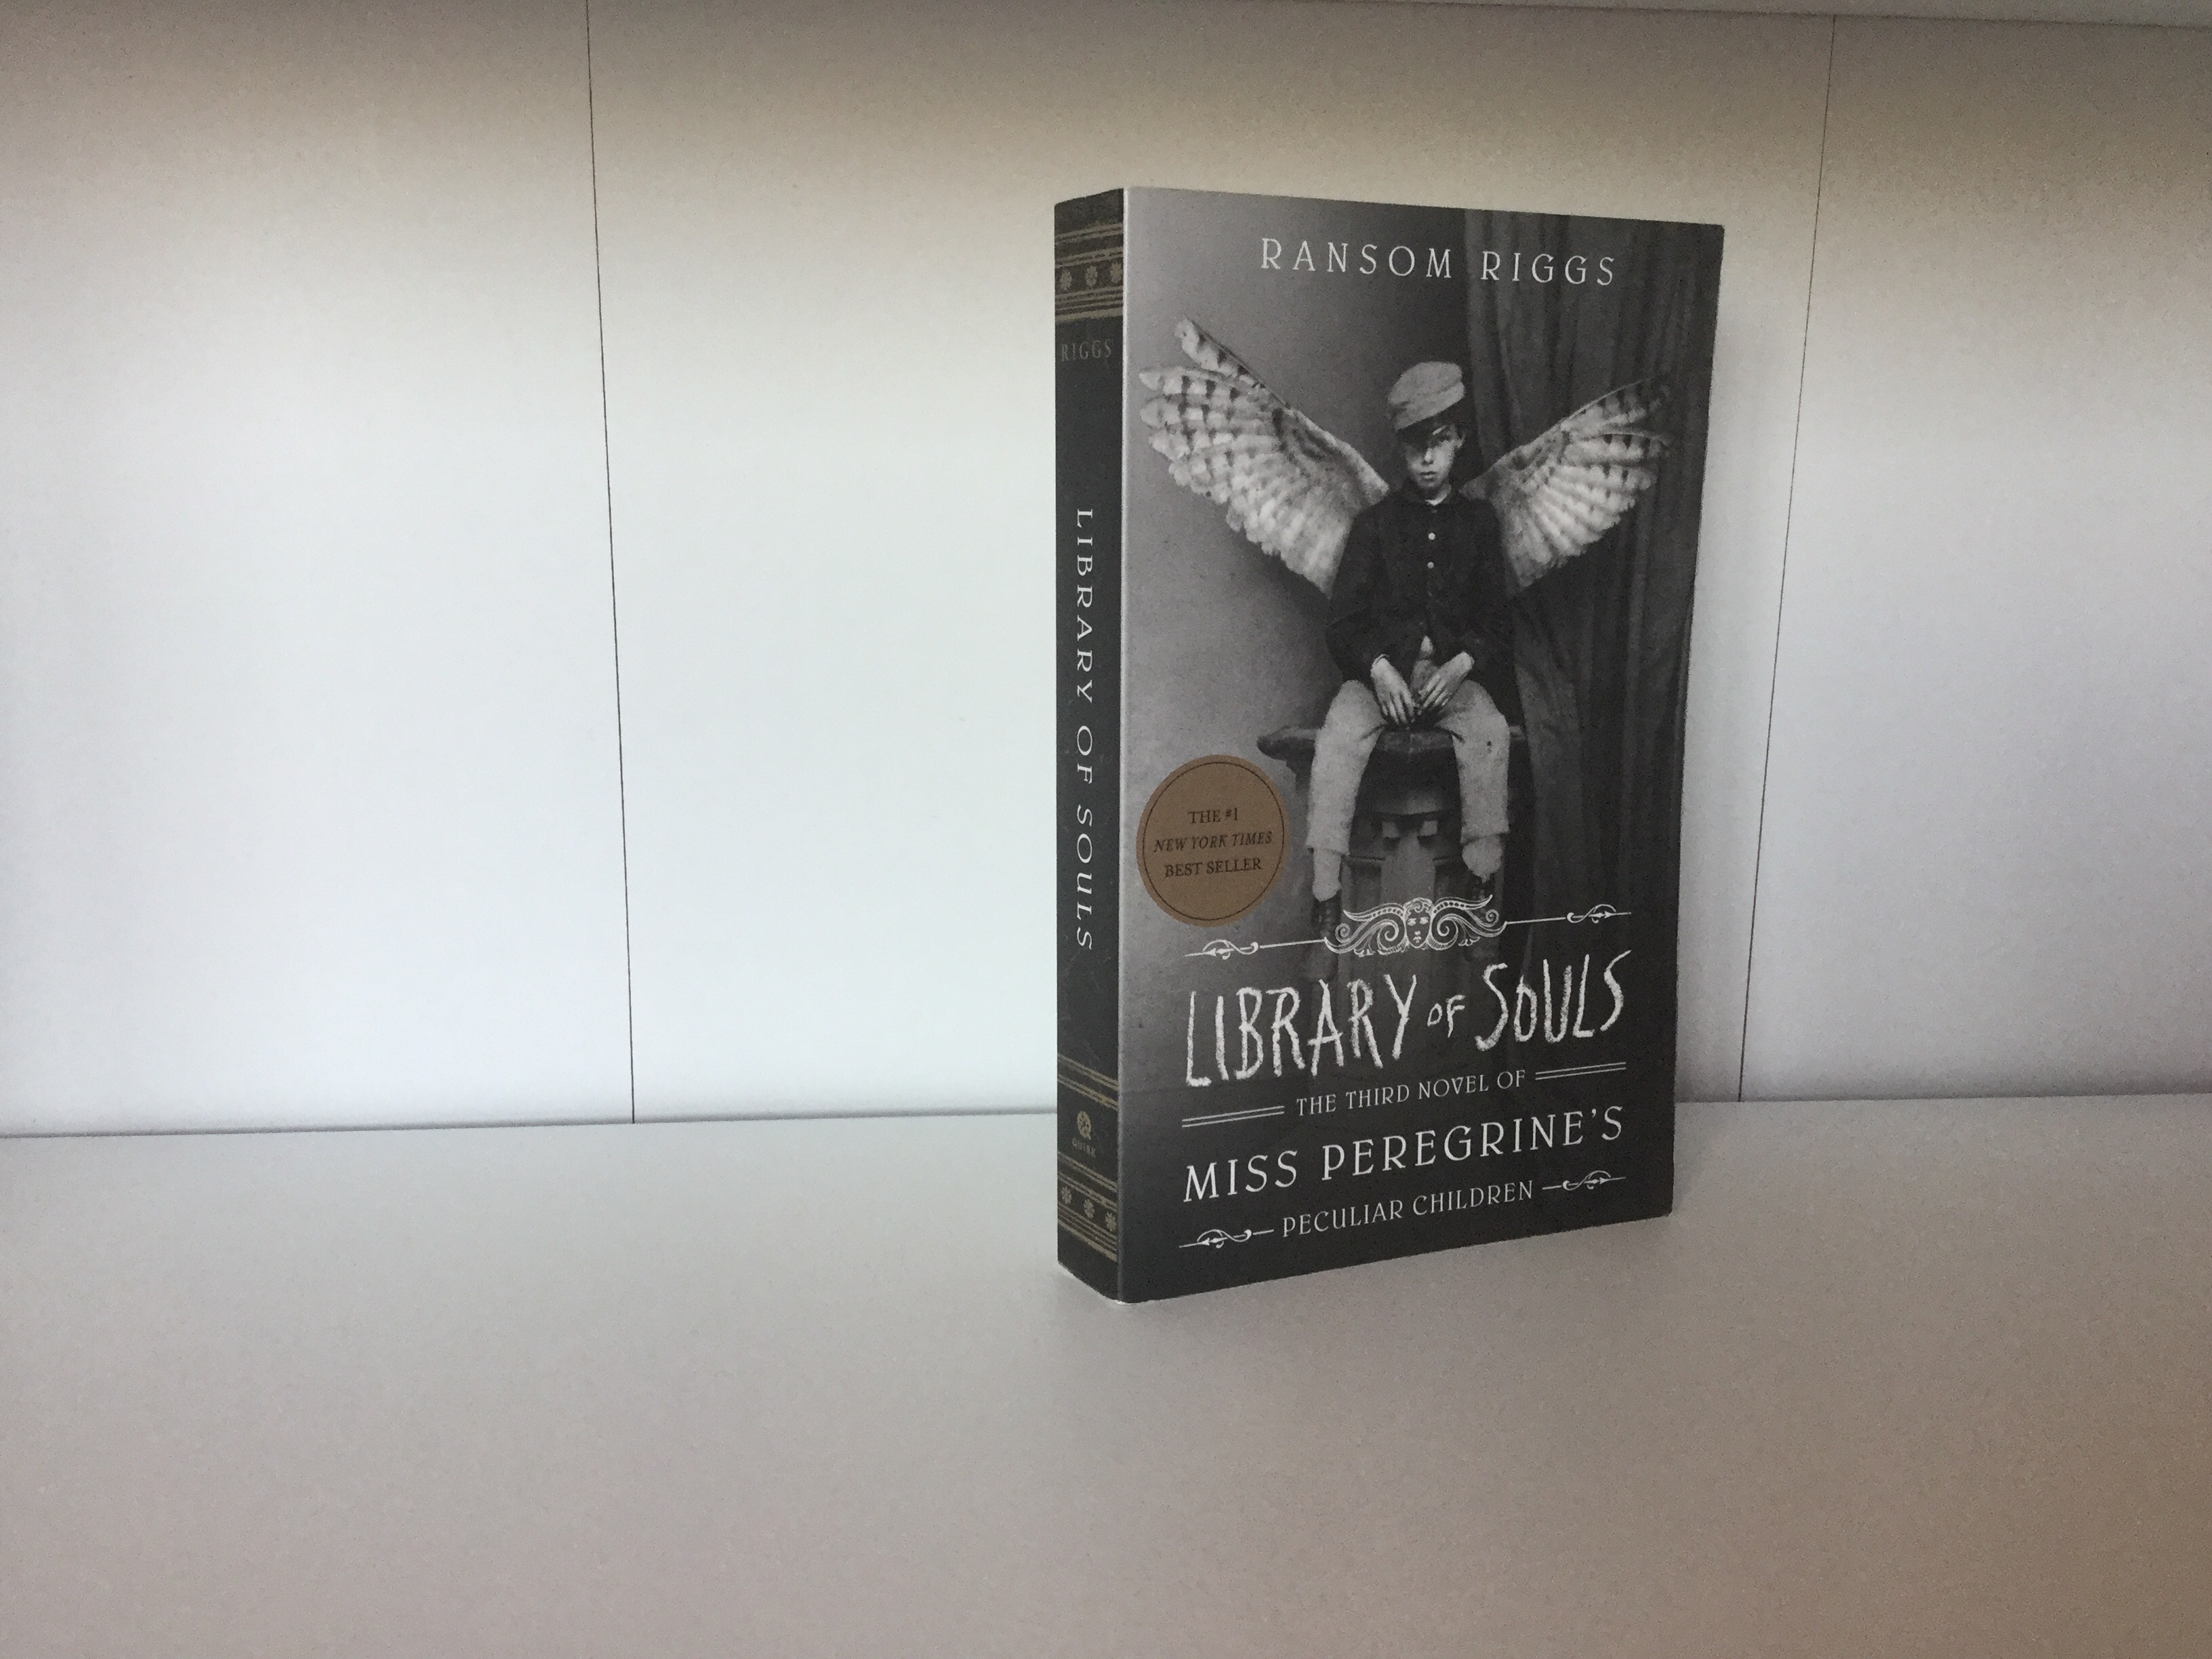 The cover of Library of Souls by Ransom Riggs